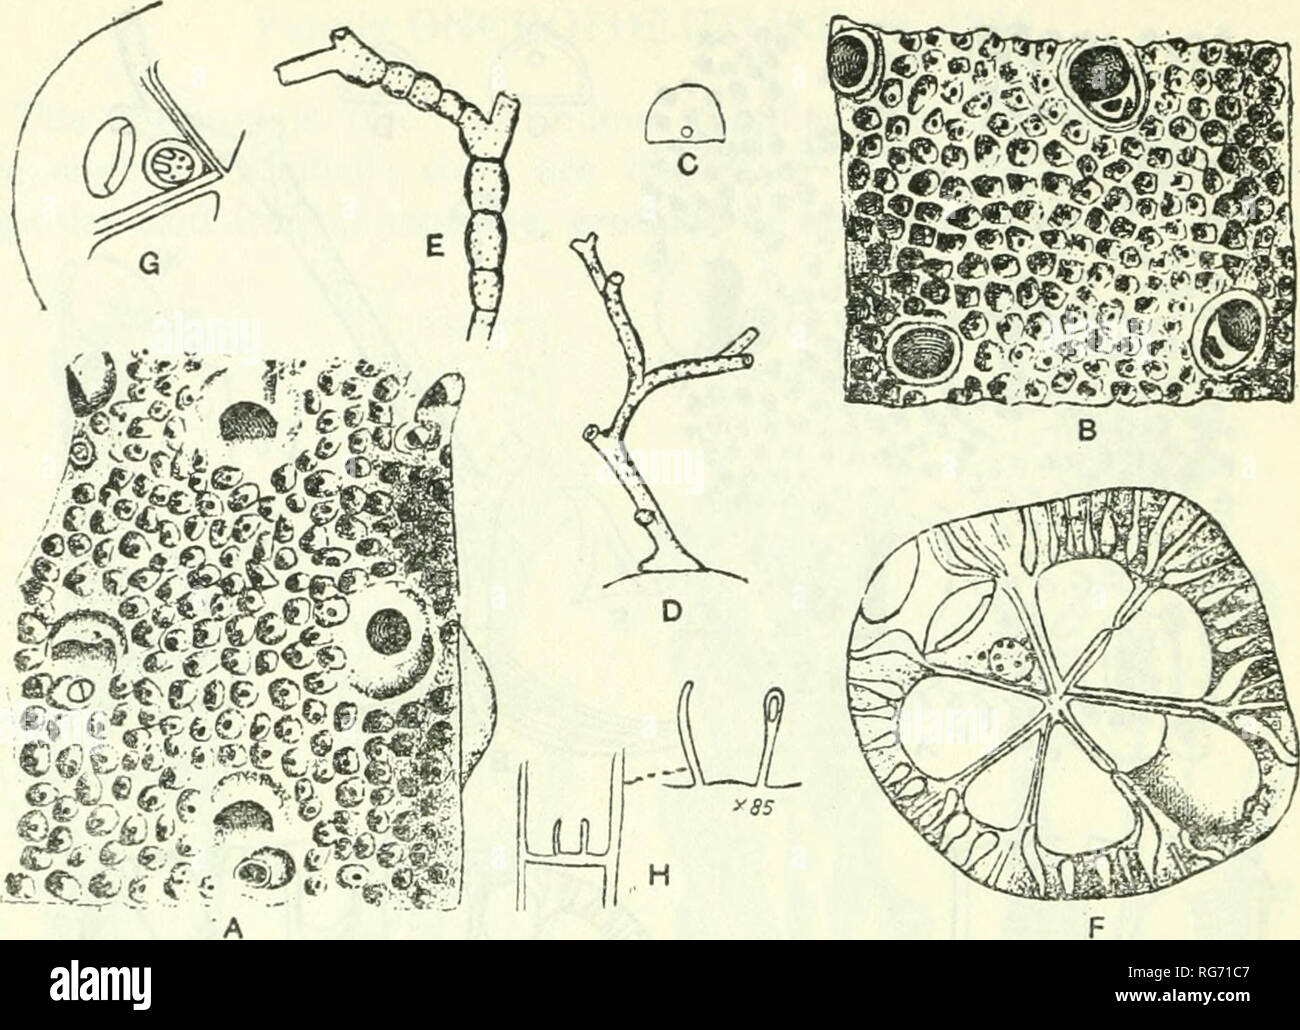 . Bulletin - United States National Museum. Science. 460 BULLETIN 100, UNITED STATES NATIONAL MUSEUM. Fig. 191.—Genus Cellarinella Waters, 1904 A-H. Cellarinella foveolata Waters, 1904. A. Younger part, X25. The aper- ture is a considerable distance from the peristomice and at right angle to it; 22 tentacles. B. Older part, X 25. The peristomice is round. C. Mandible, X 85. D. Zoarium, natural size. E. Natural size, nodulated form. F. Calcareous section showing the underside of the distal multiporous septula, X25. G. Section showing the septula from above protected by a pair of spinous process Stock Photo